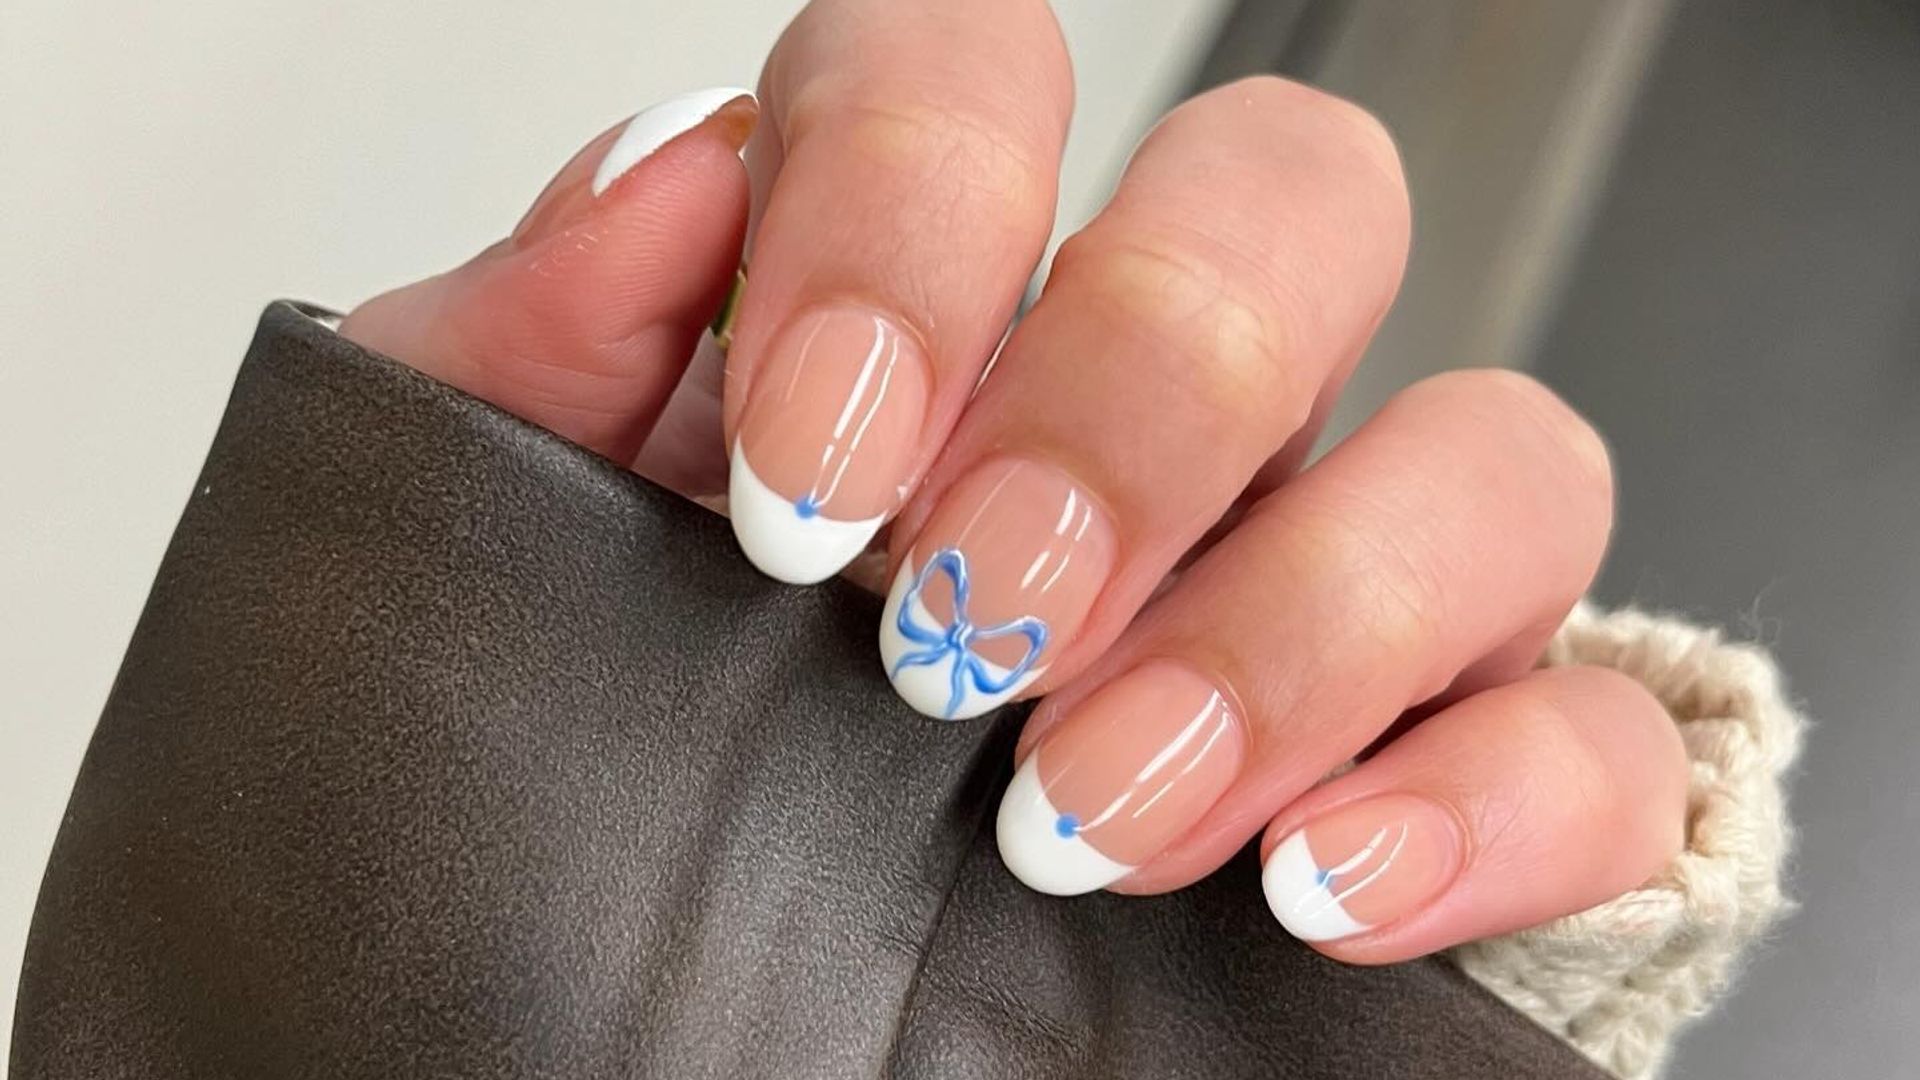 Paint your nails with creativity: 6 eye catchy nail arts